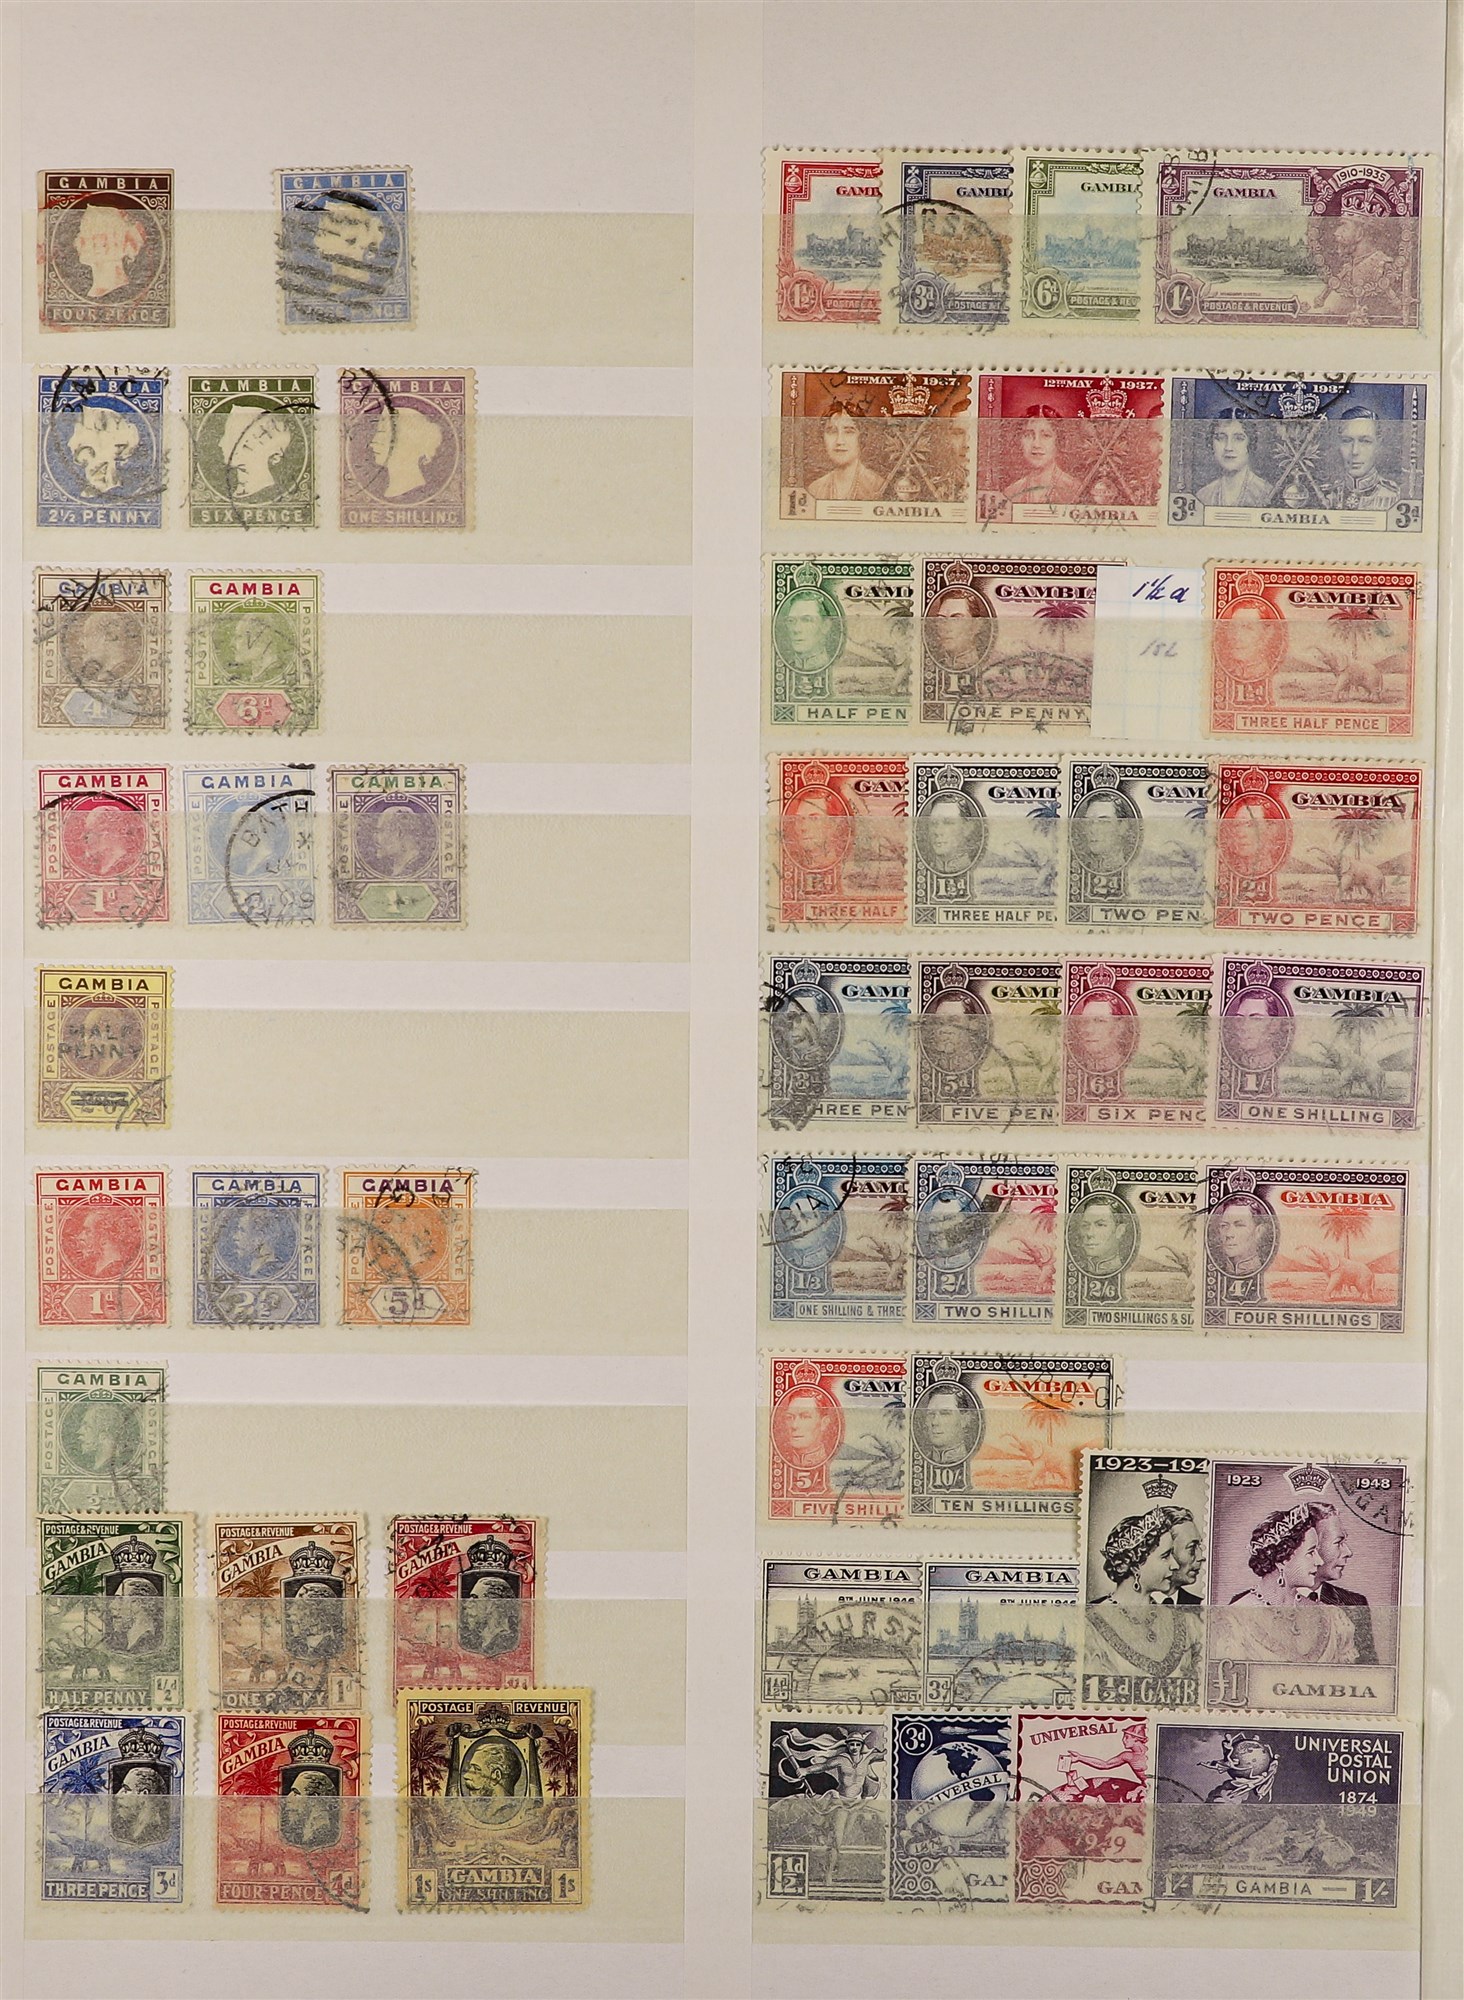 GAMBIA 1869 - 1981 COLLECTION of 300+ fine used stamps, 1869 4d imperf no wmk, 1880-81 3d upright